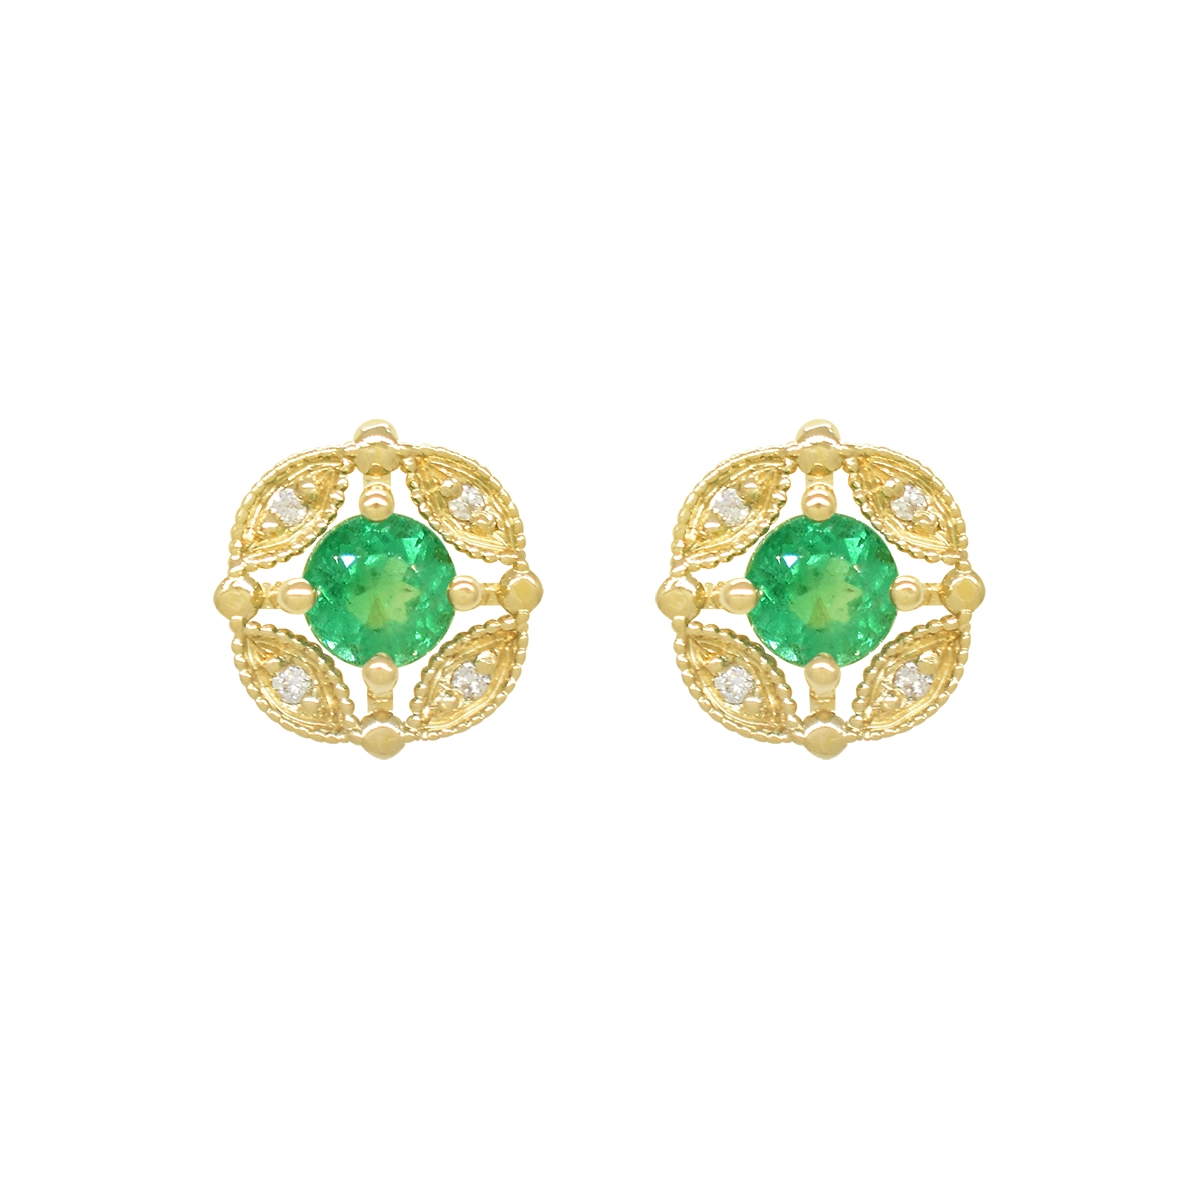 18K gold emerald and diamond stud earrings with 0.62 Ct. t.w. in 2 round cut real natural emeralds and 0.04 Ct. t.w. in 8 round cut genuine diamonds